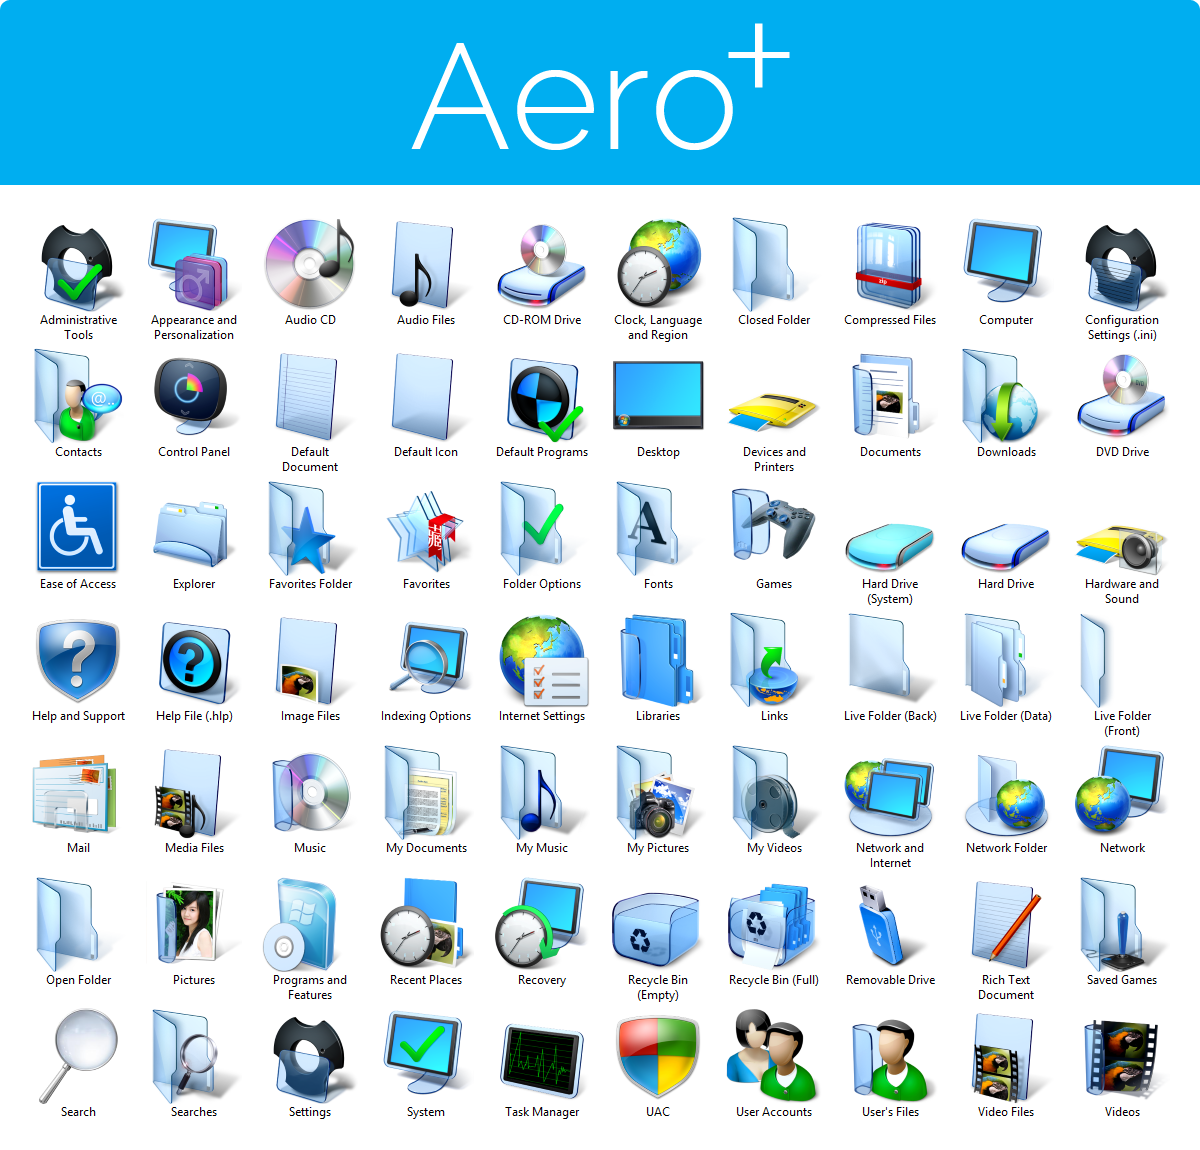 Get over 200 free Windows 10 icons | Windows 10 and Icons